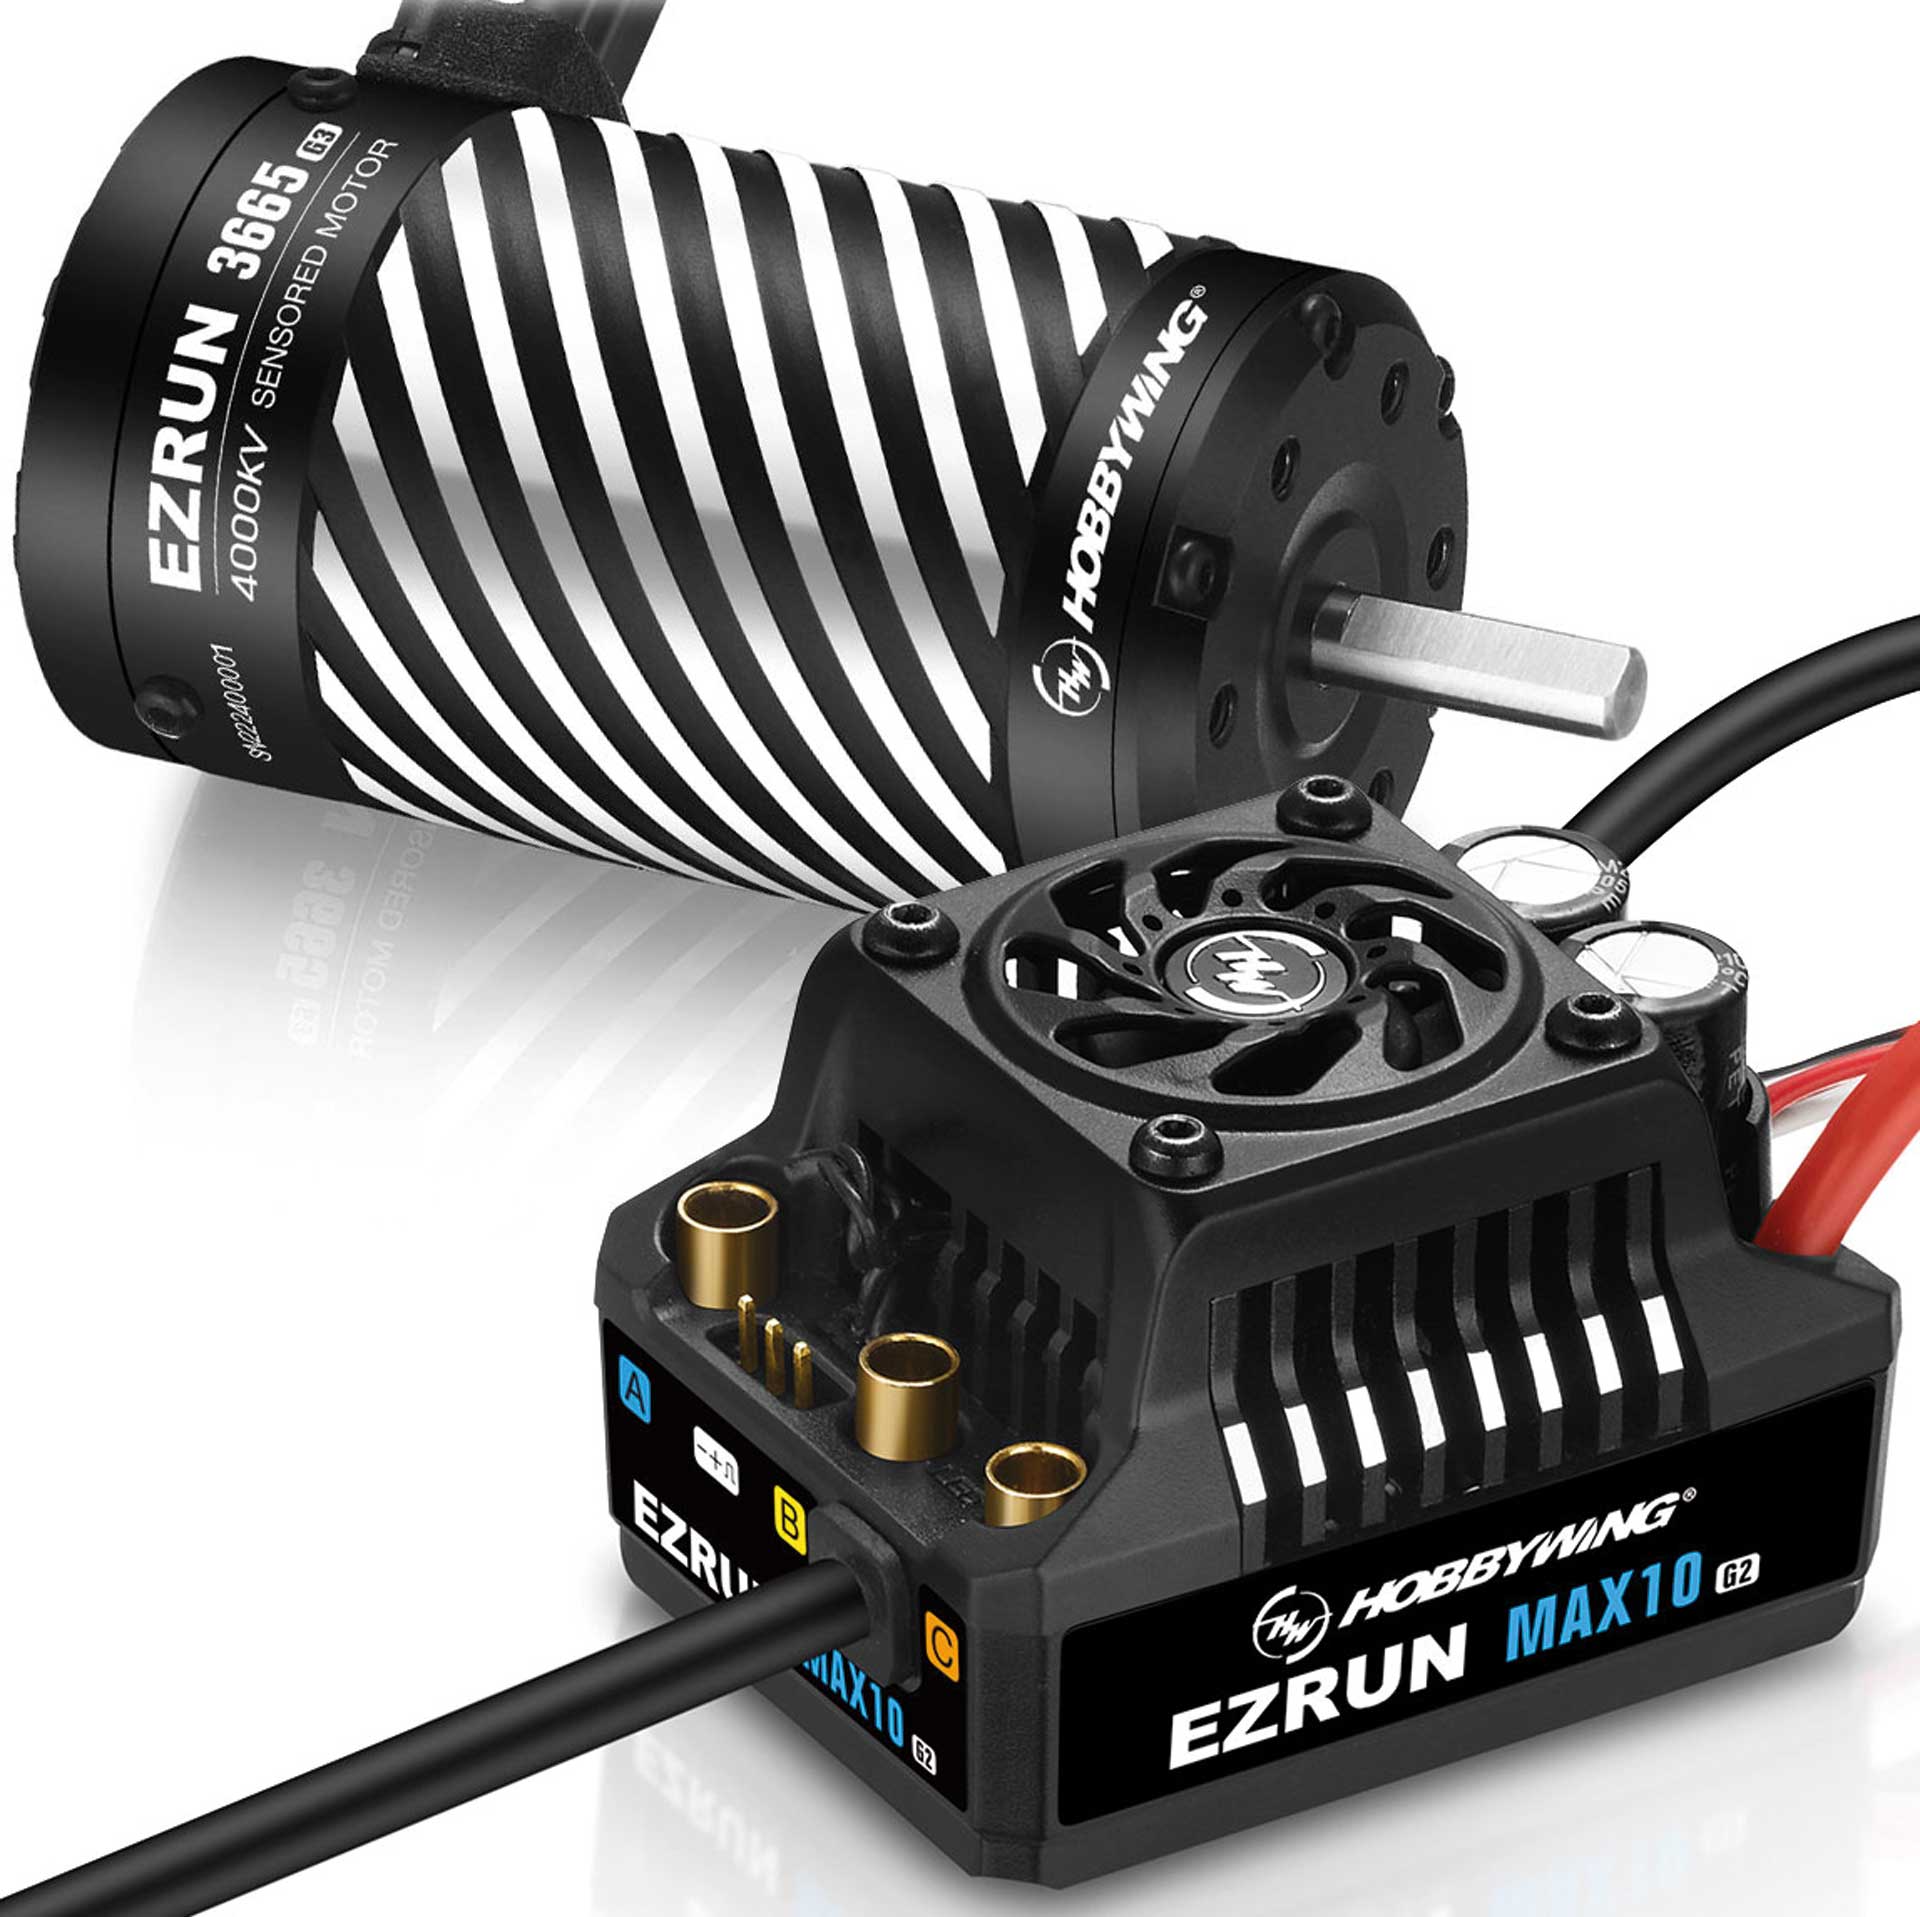 HOBBYWING Ezrun MAX10 G2 140A Combo mit 3665SD 4000kV 5mm Welle